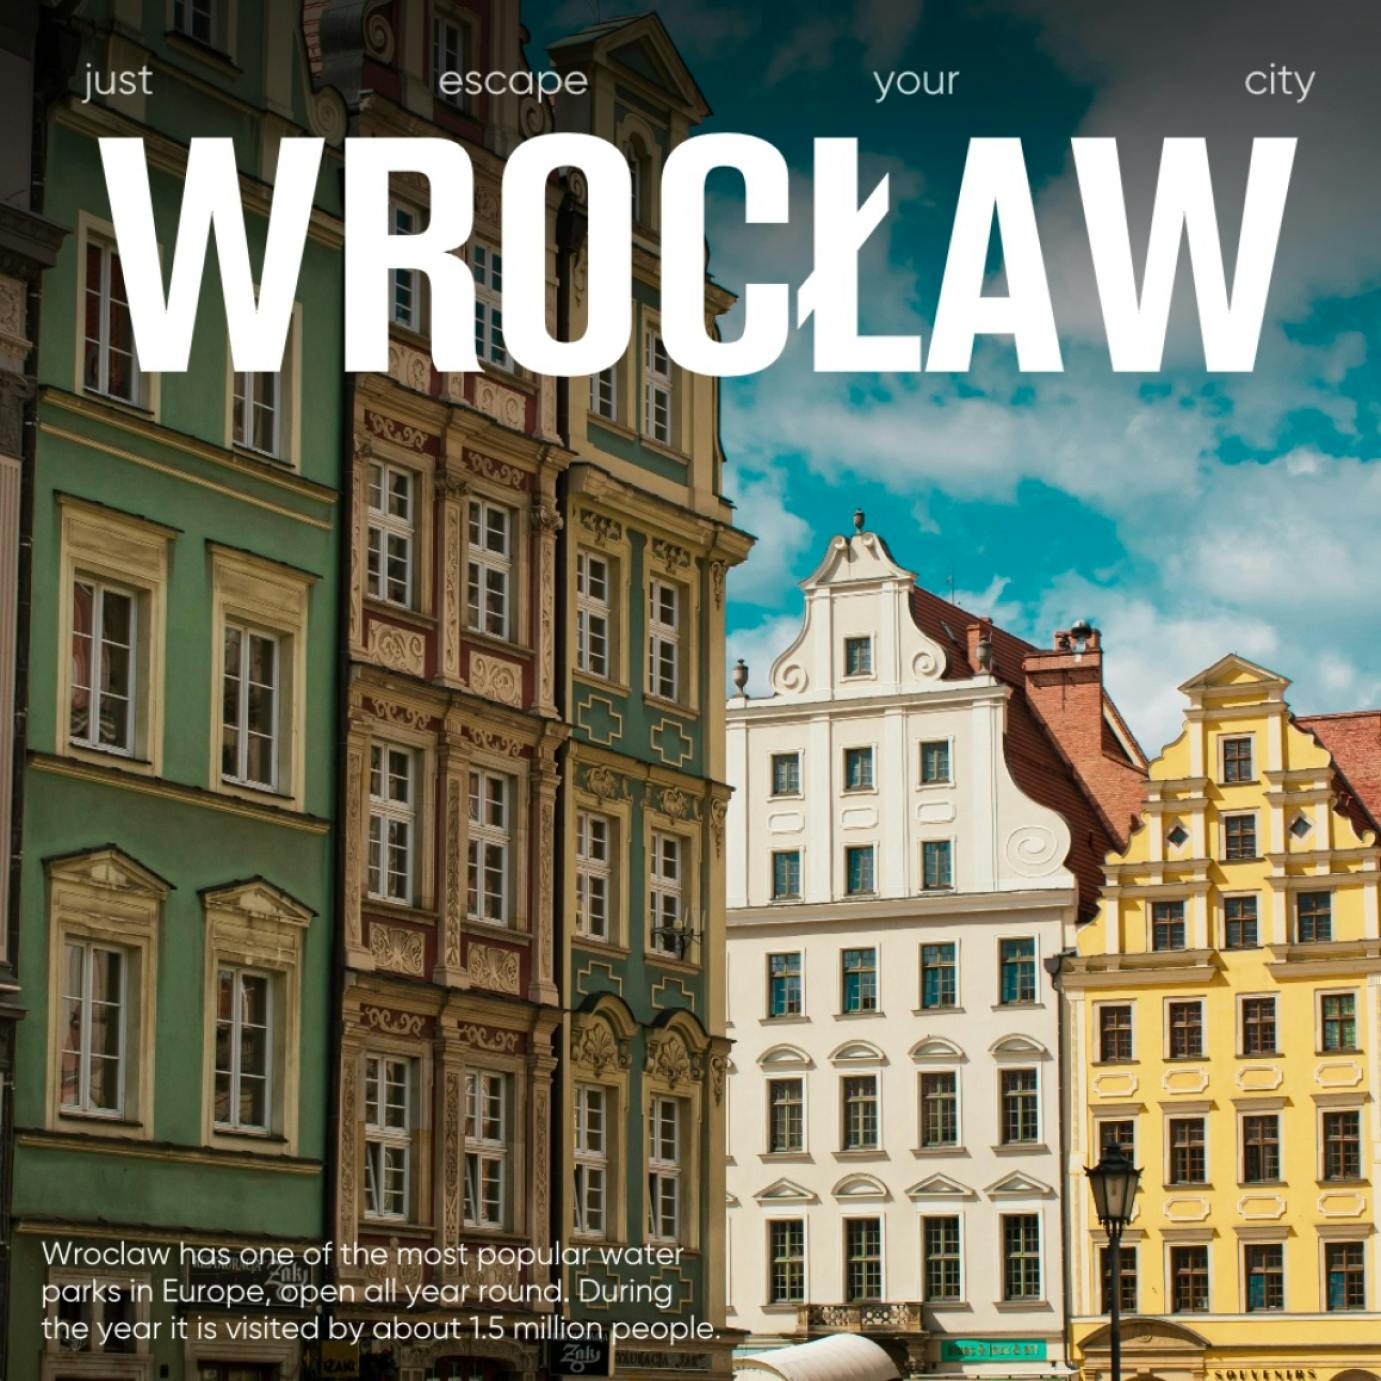 Scavenger hunt through Wroclaw's old town with your phone